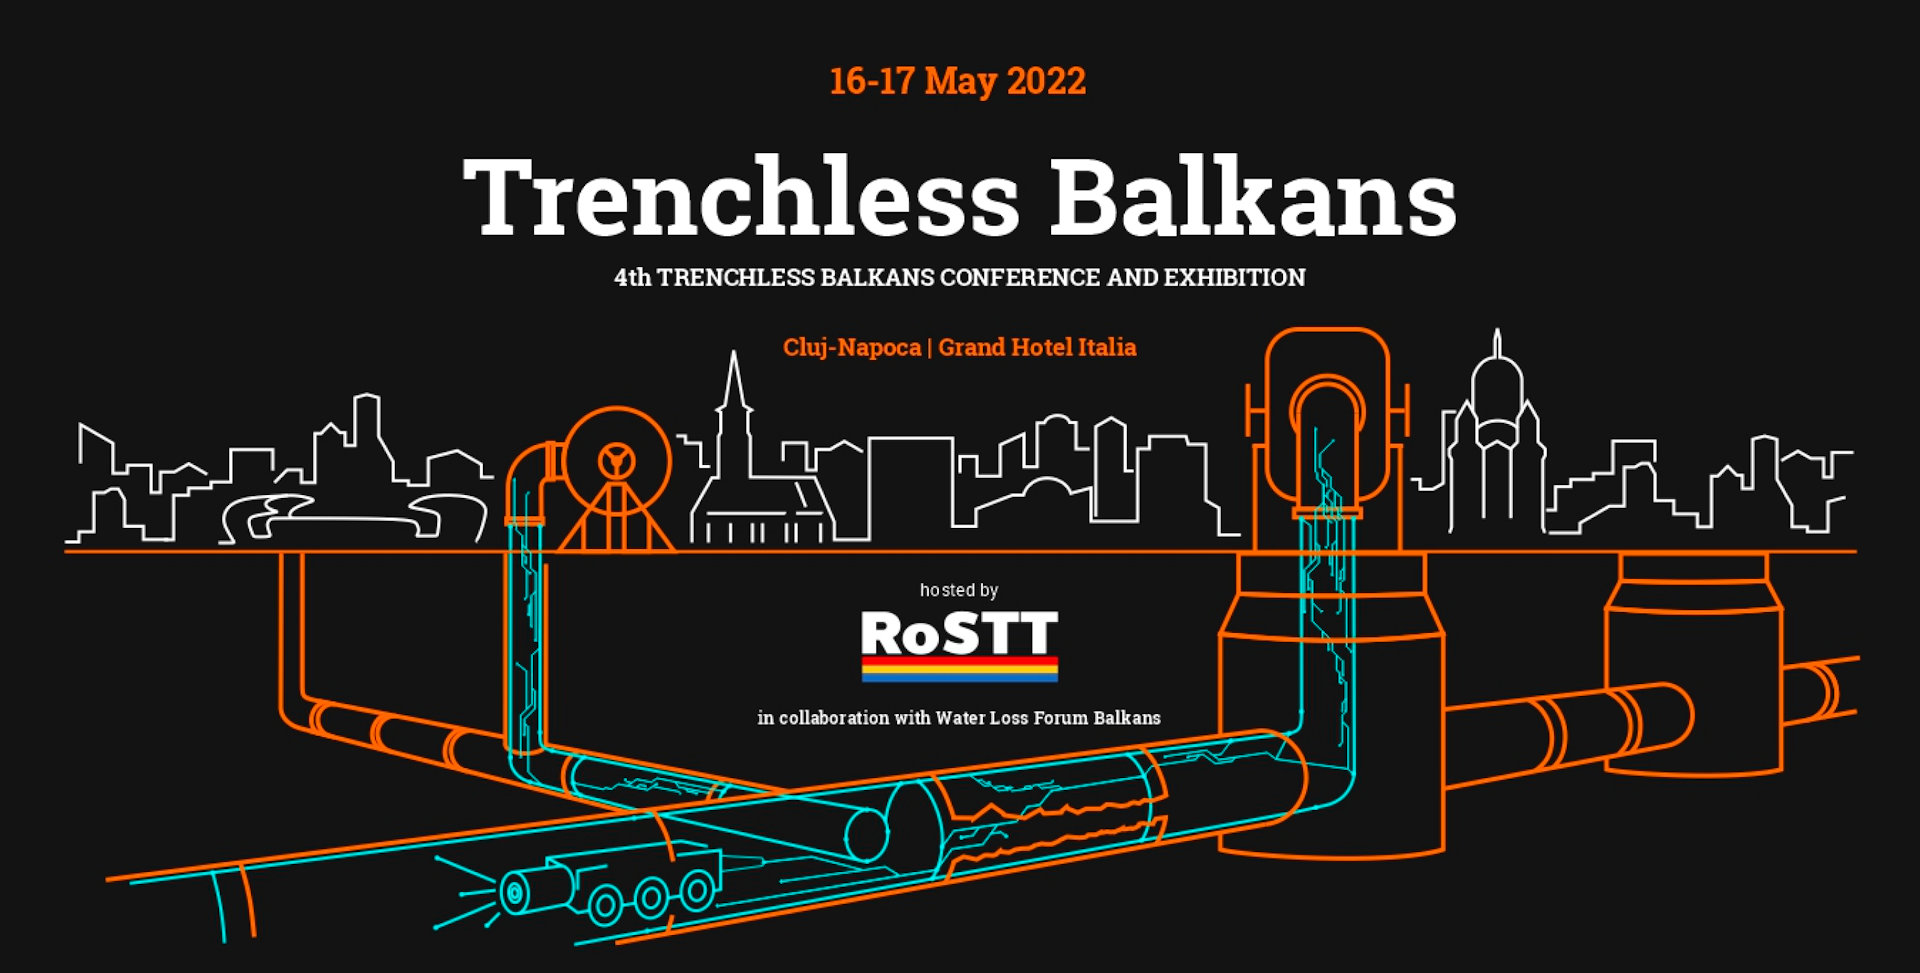 4th TRENCHLESS BALKANS CONFERENCE AND EXHIBITION